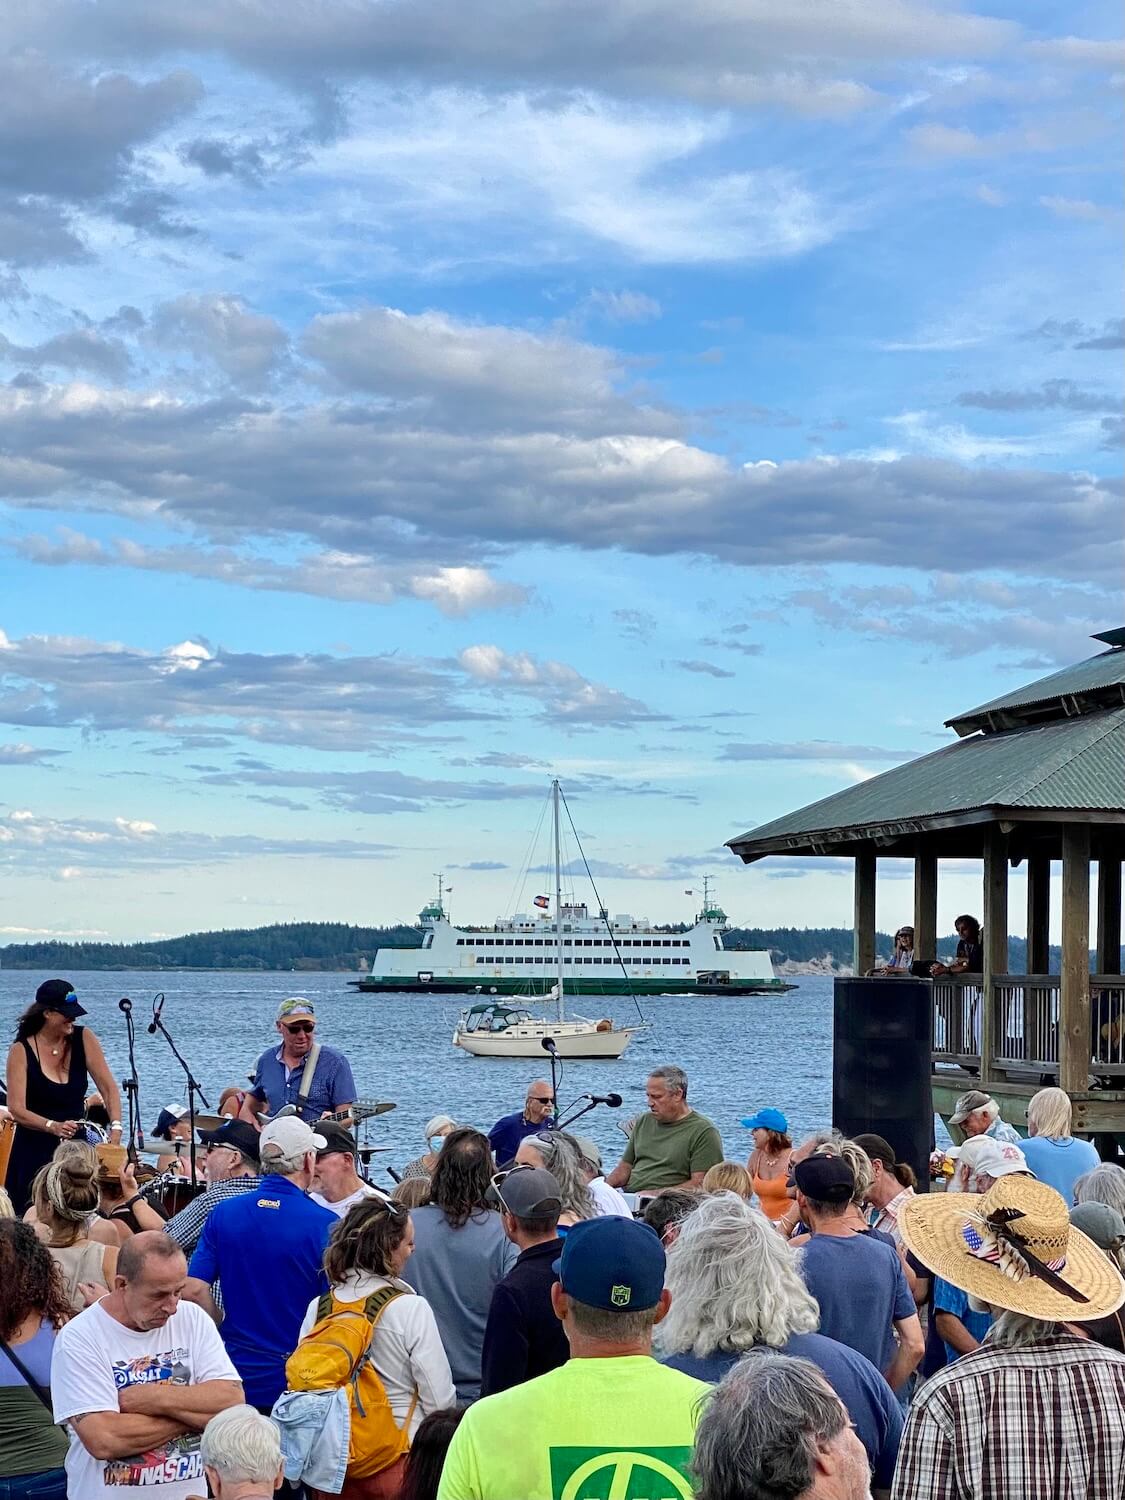 A crowded festival of people dancing at a concert celebrate under partly cloudy skies as a sailboat and ferry glide by in the Salish Sea in the background.